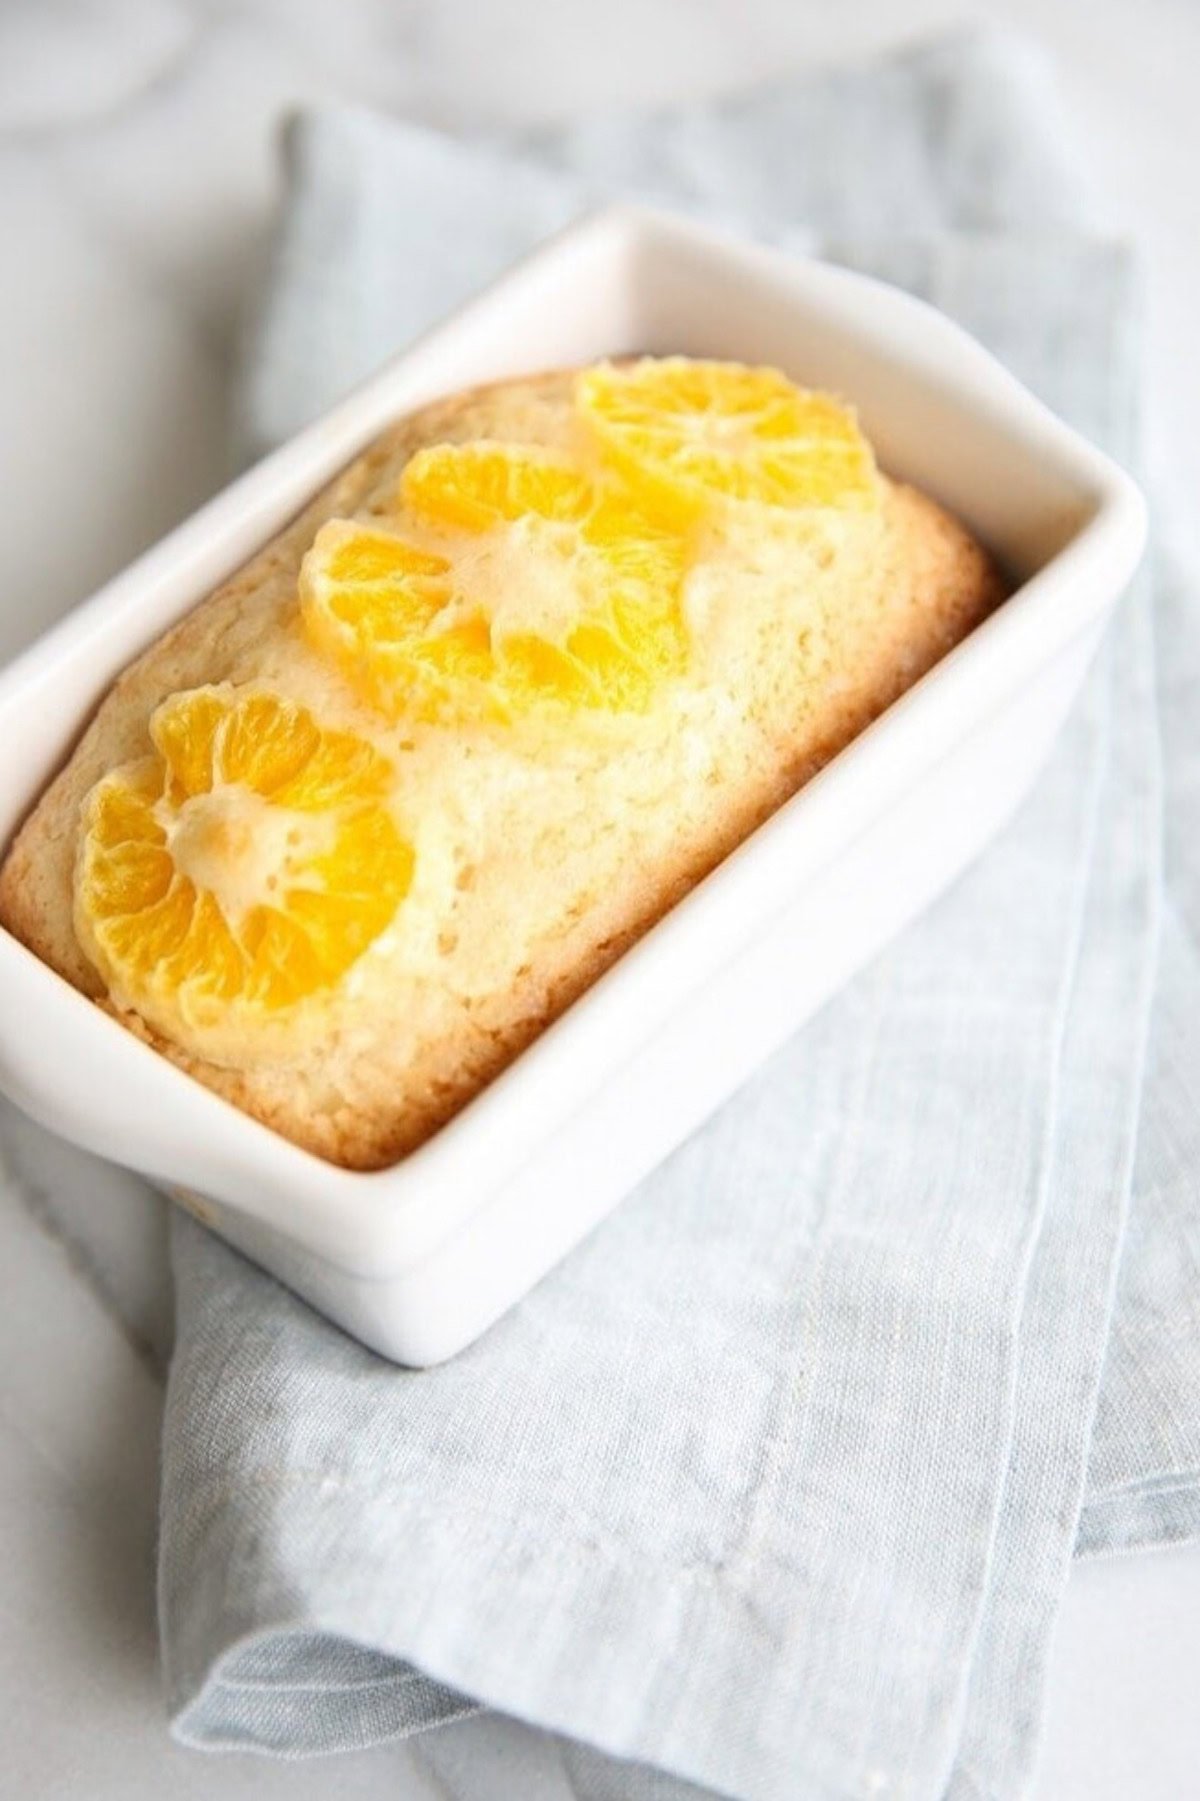 A rectangular loaf of quick orange bread, topped with three orange slices, rests in a white ceramic dish on a folded light blue cloth.